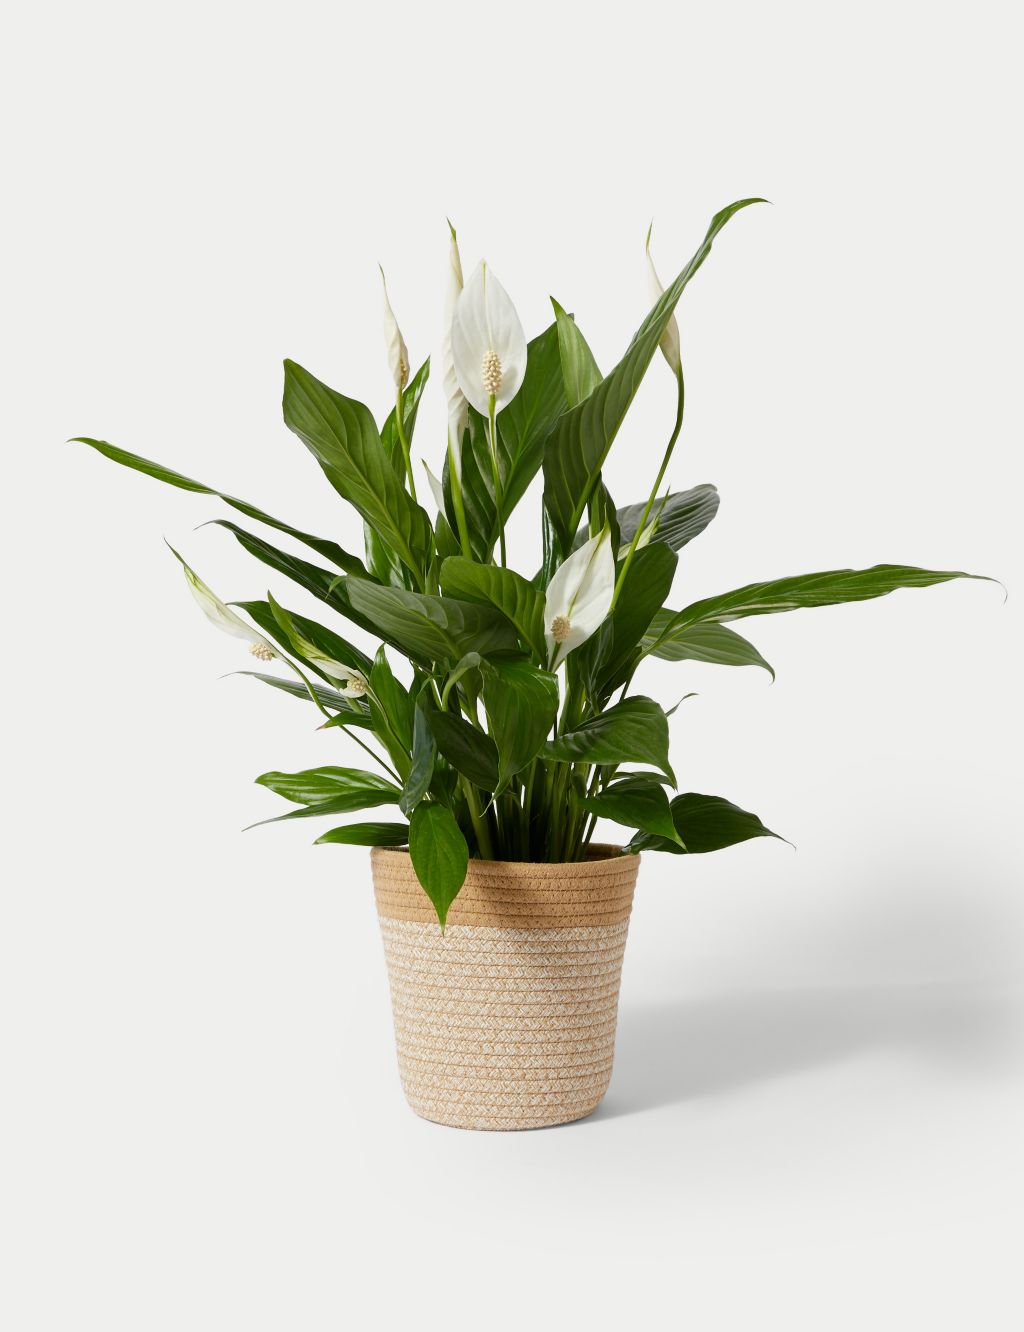 Large Peace Lily in Basket 1 of 4